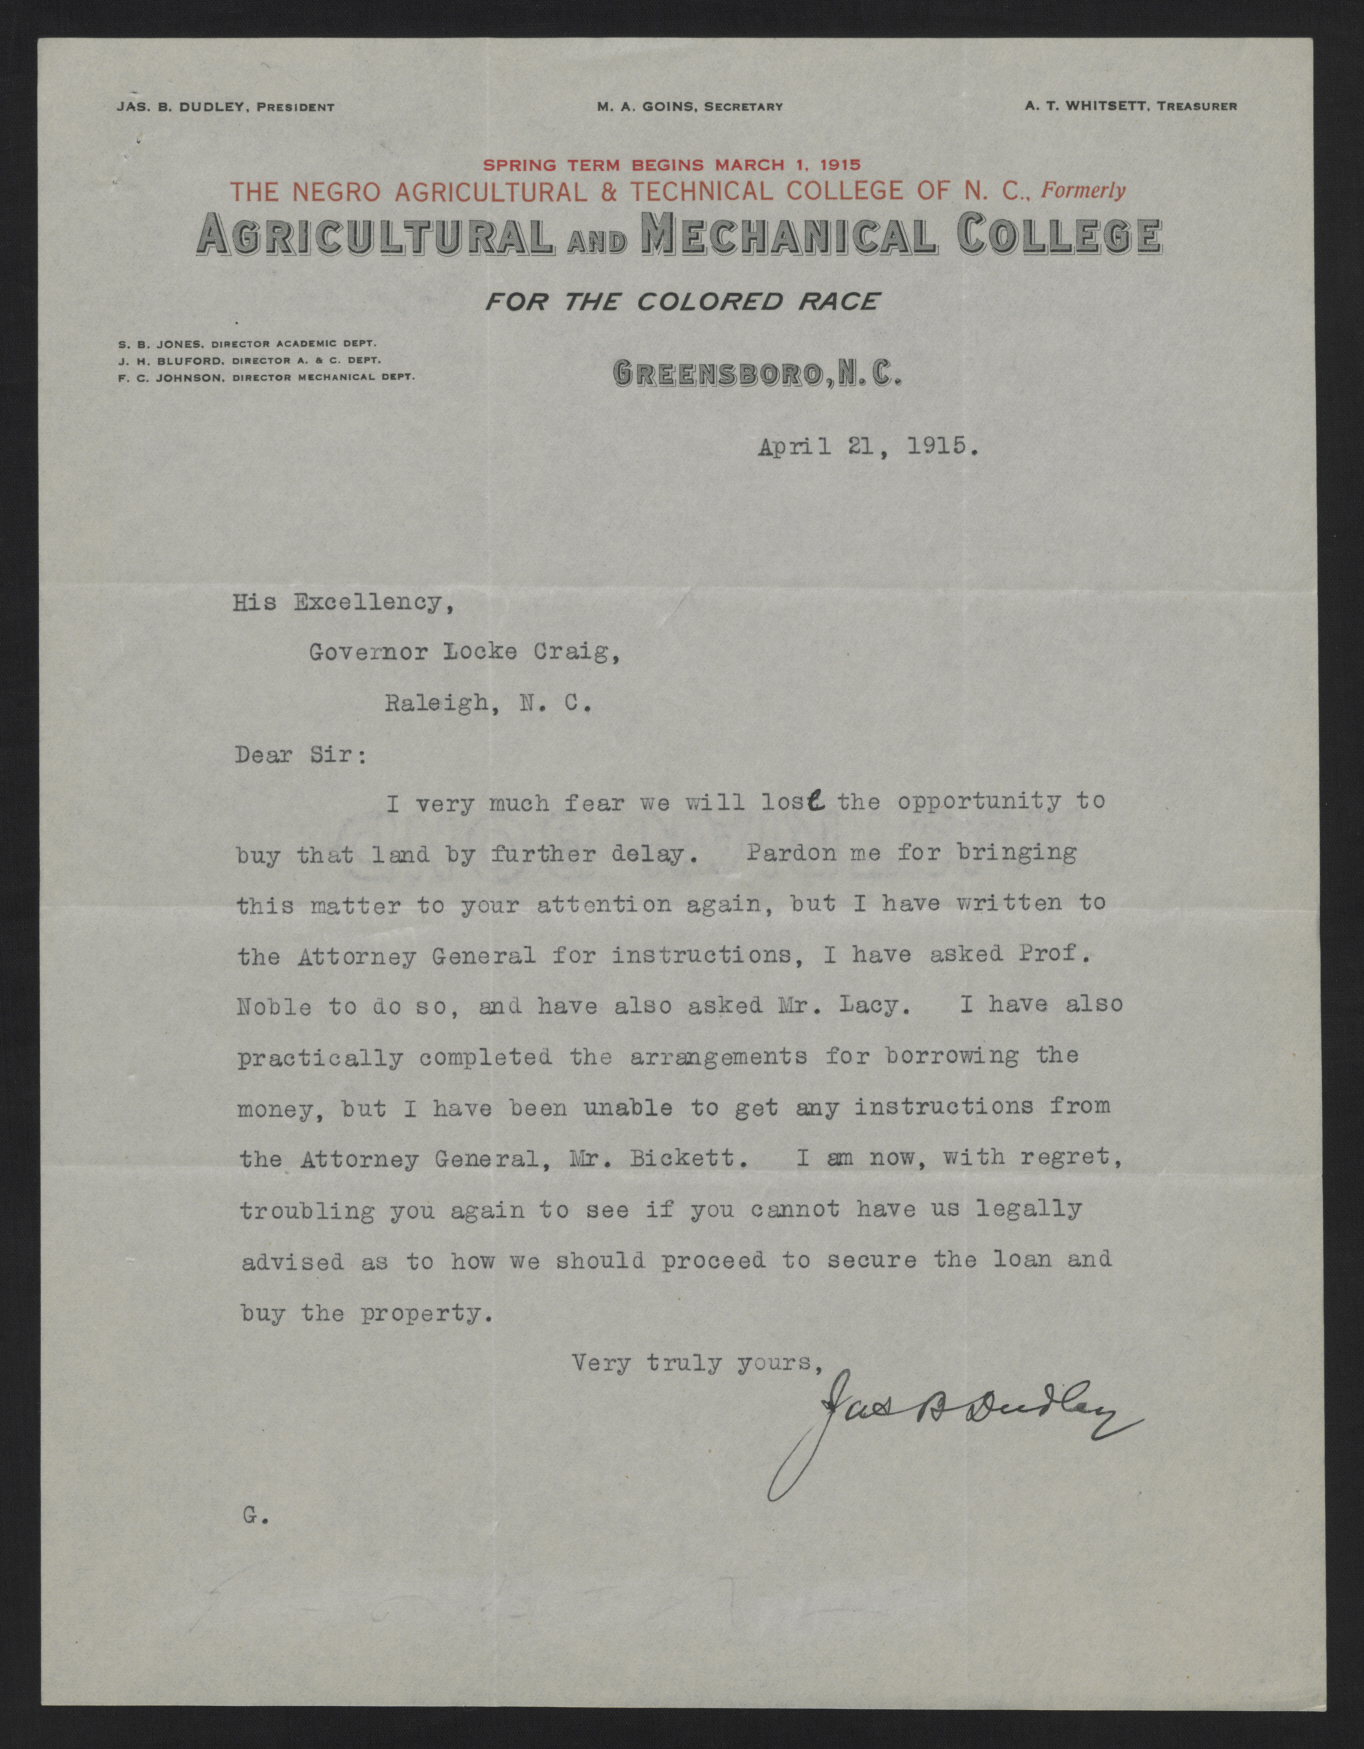 Letter from Dudley to Craig, April 21, 1915